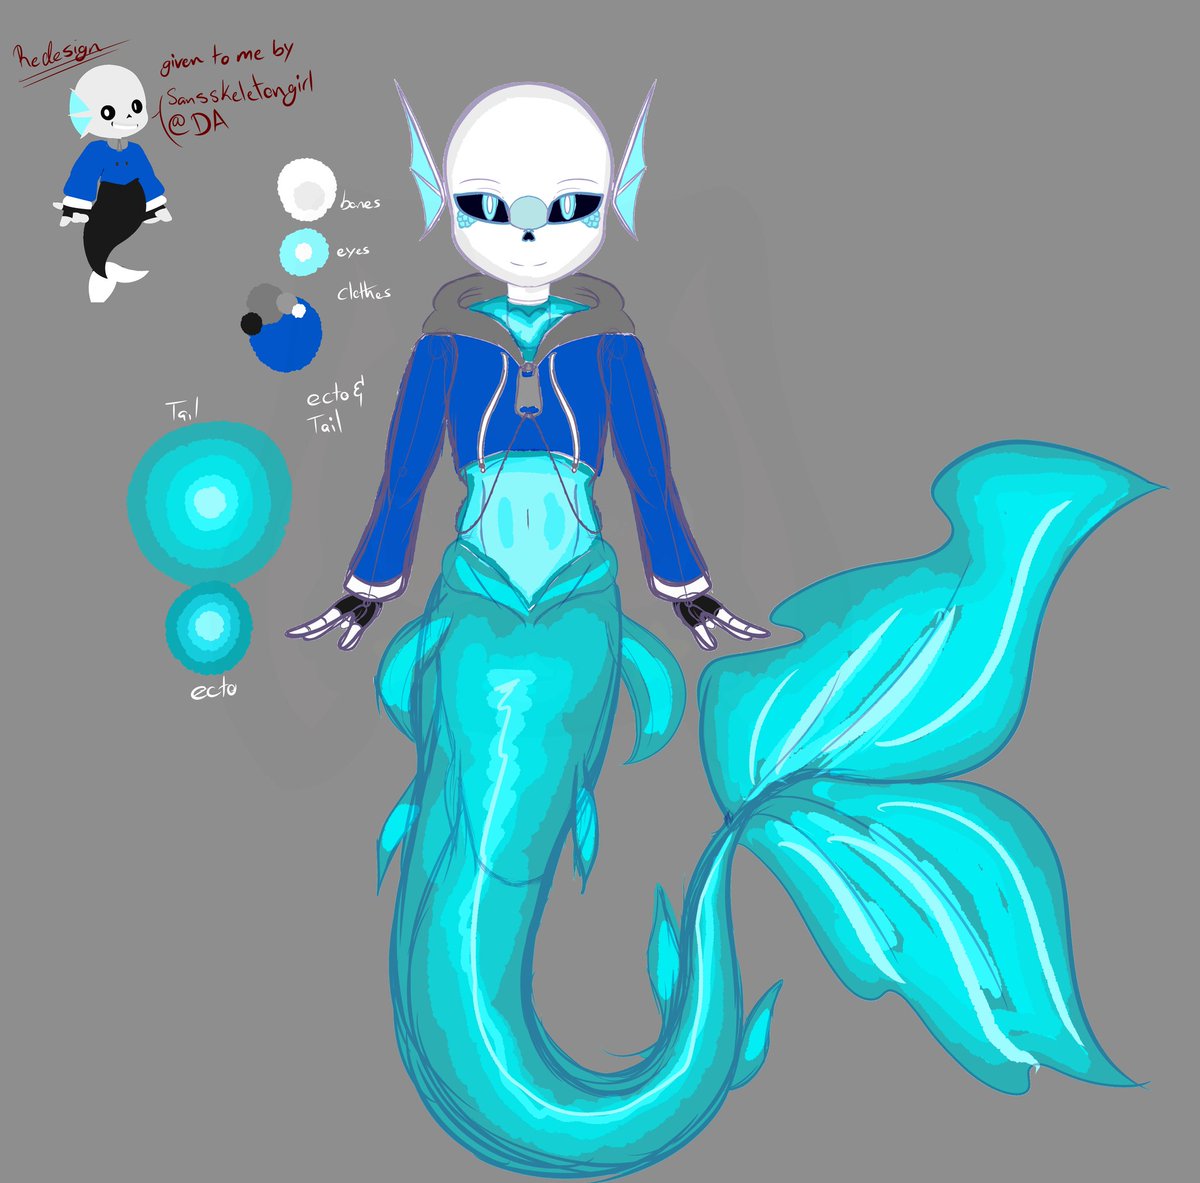 I was given this guy on DA and I made small.
#sans #mermaidsans #redesign